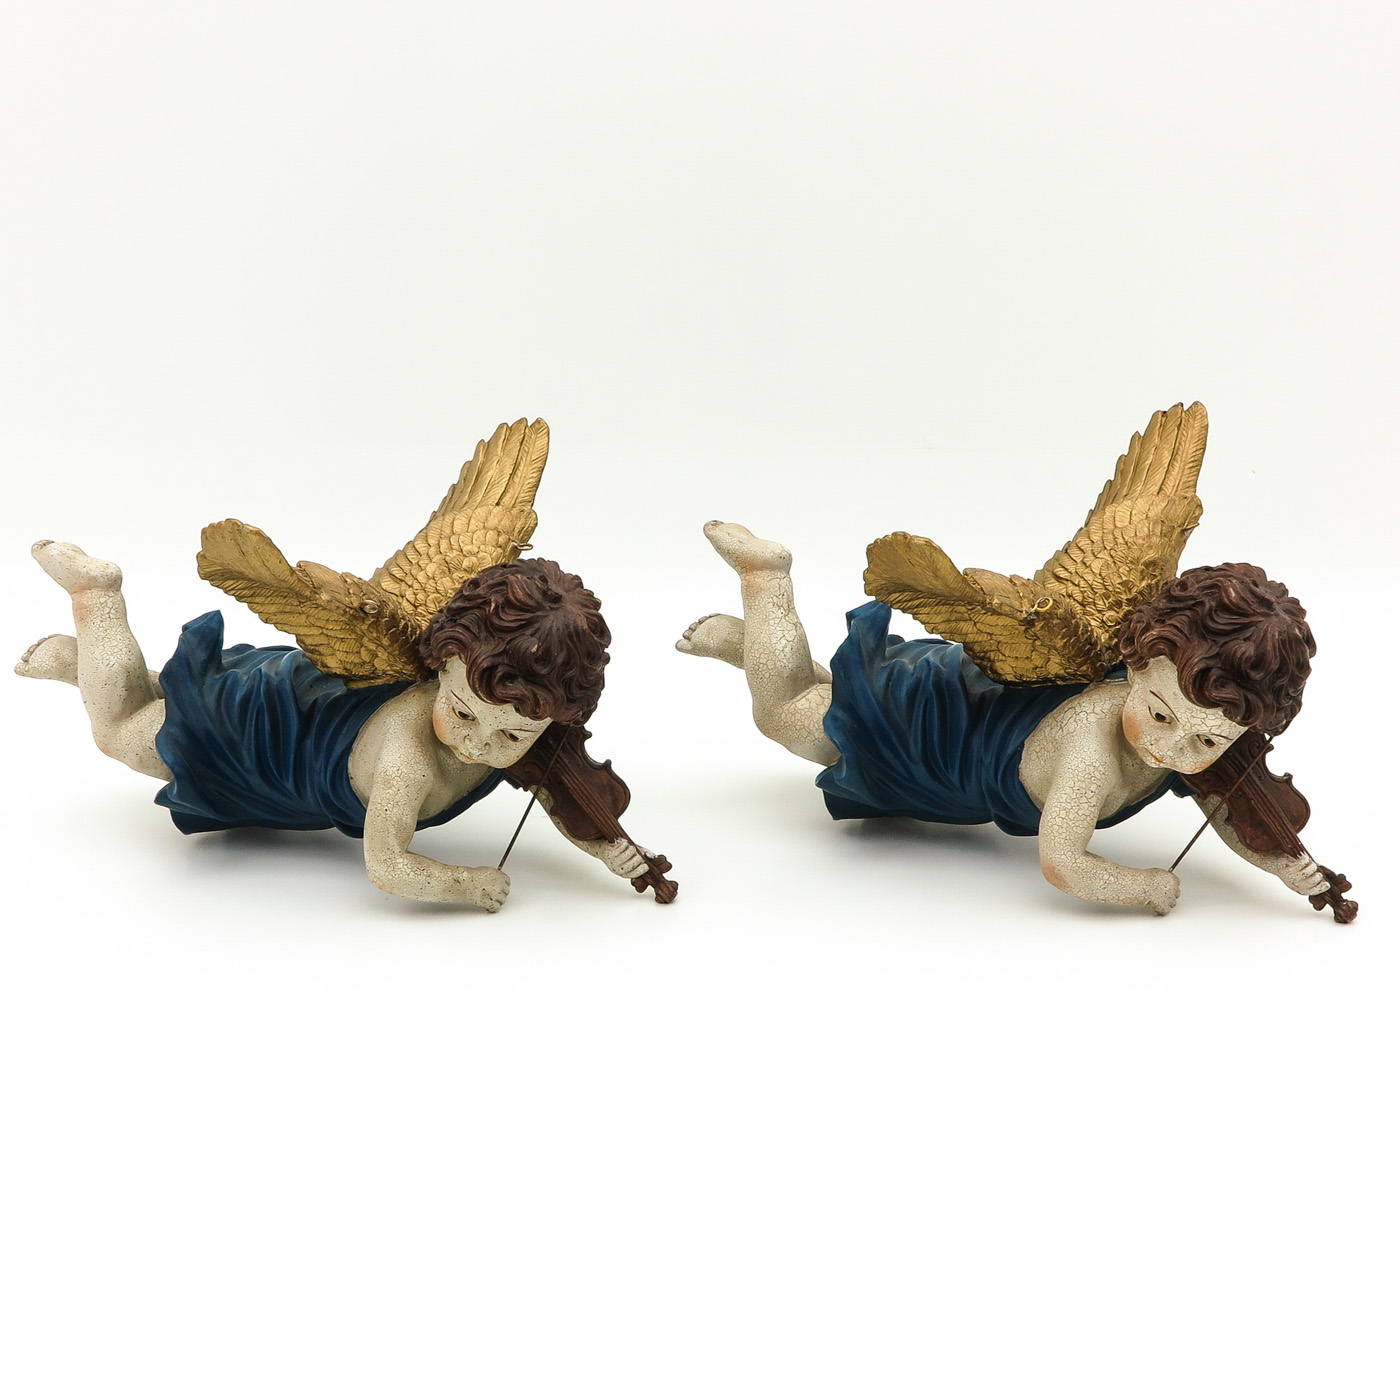 A Pair of Carved Wood Angels